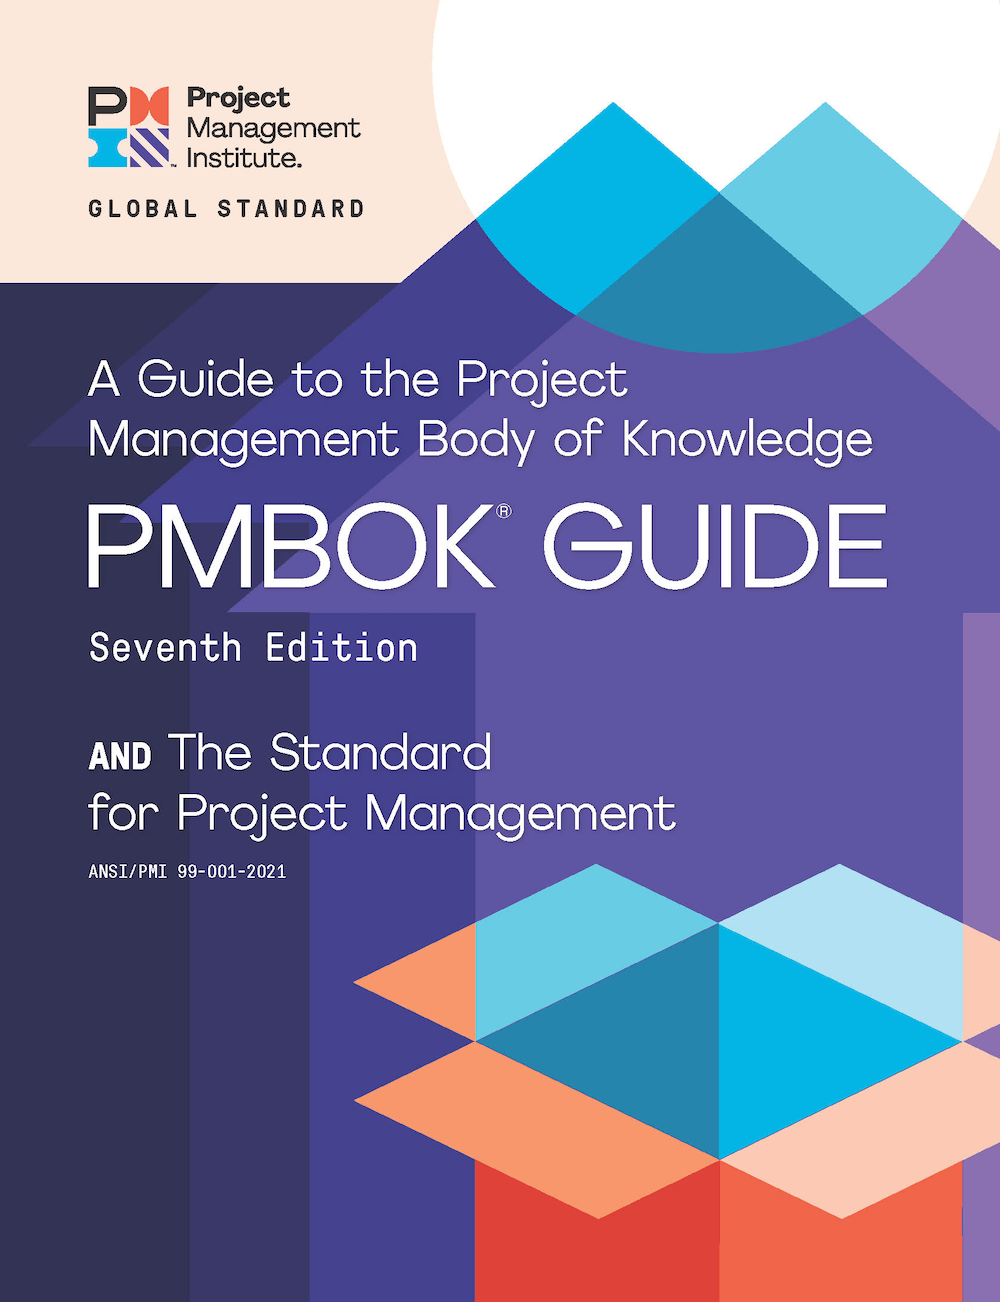 Download PMBOK Guide 7th Edition (PDF) FREE for PMI Members PMP